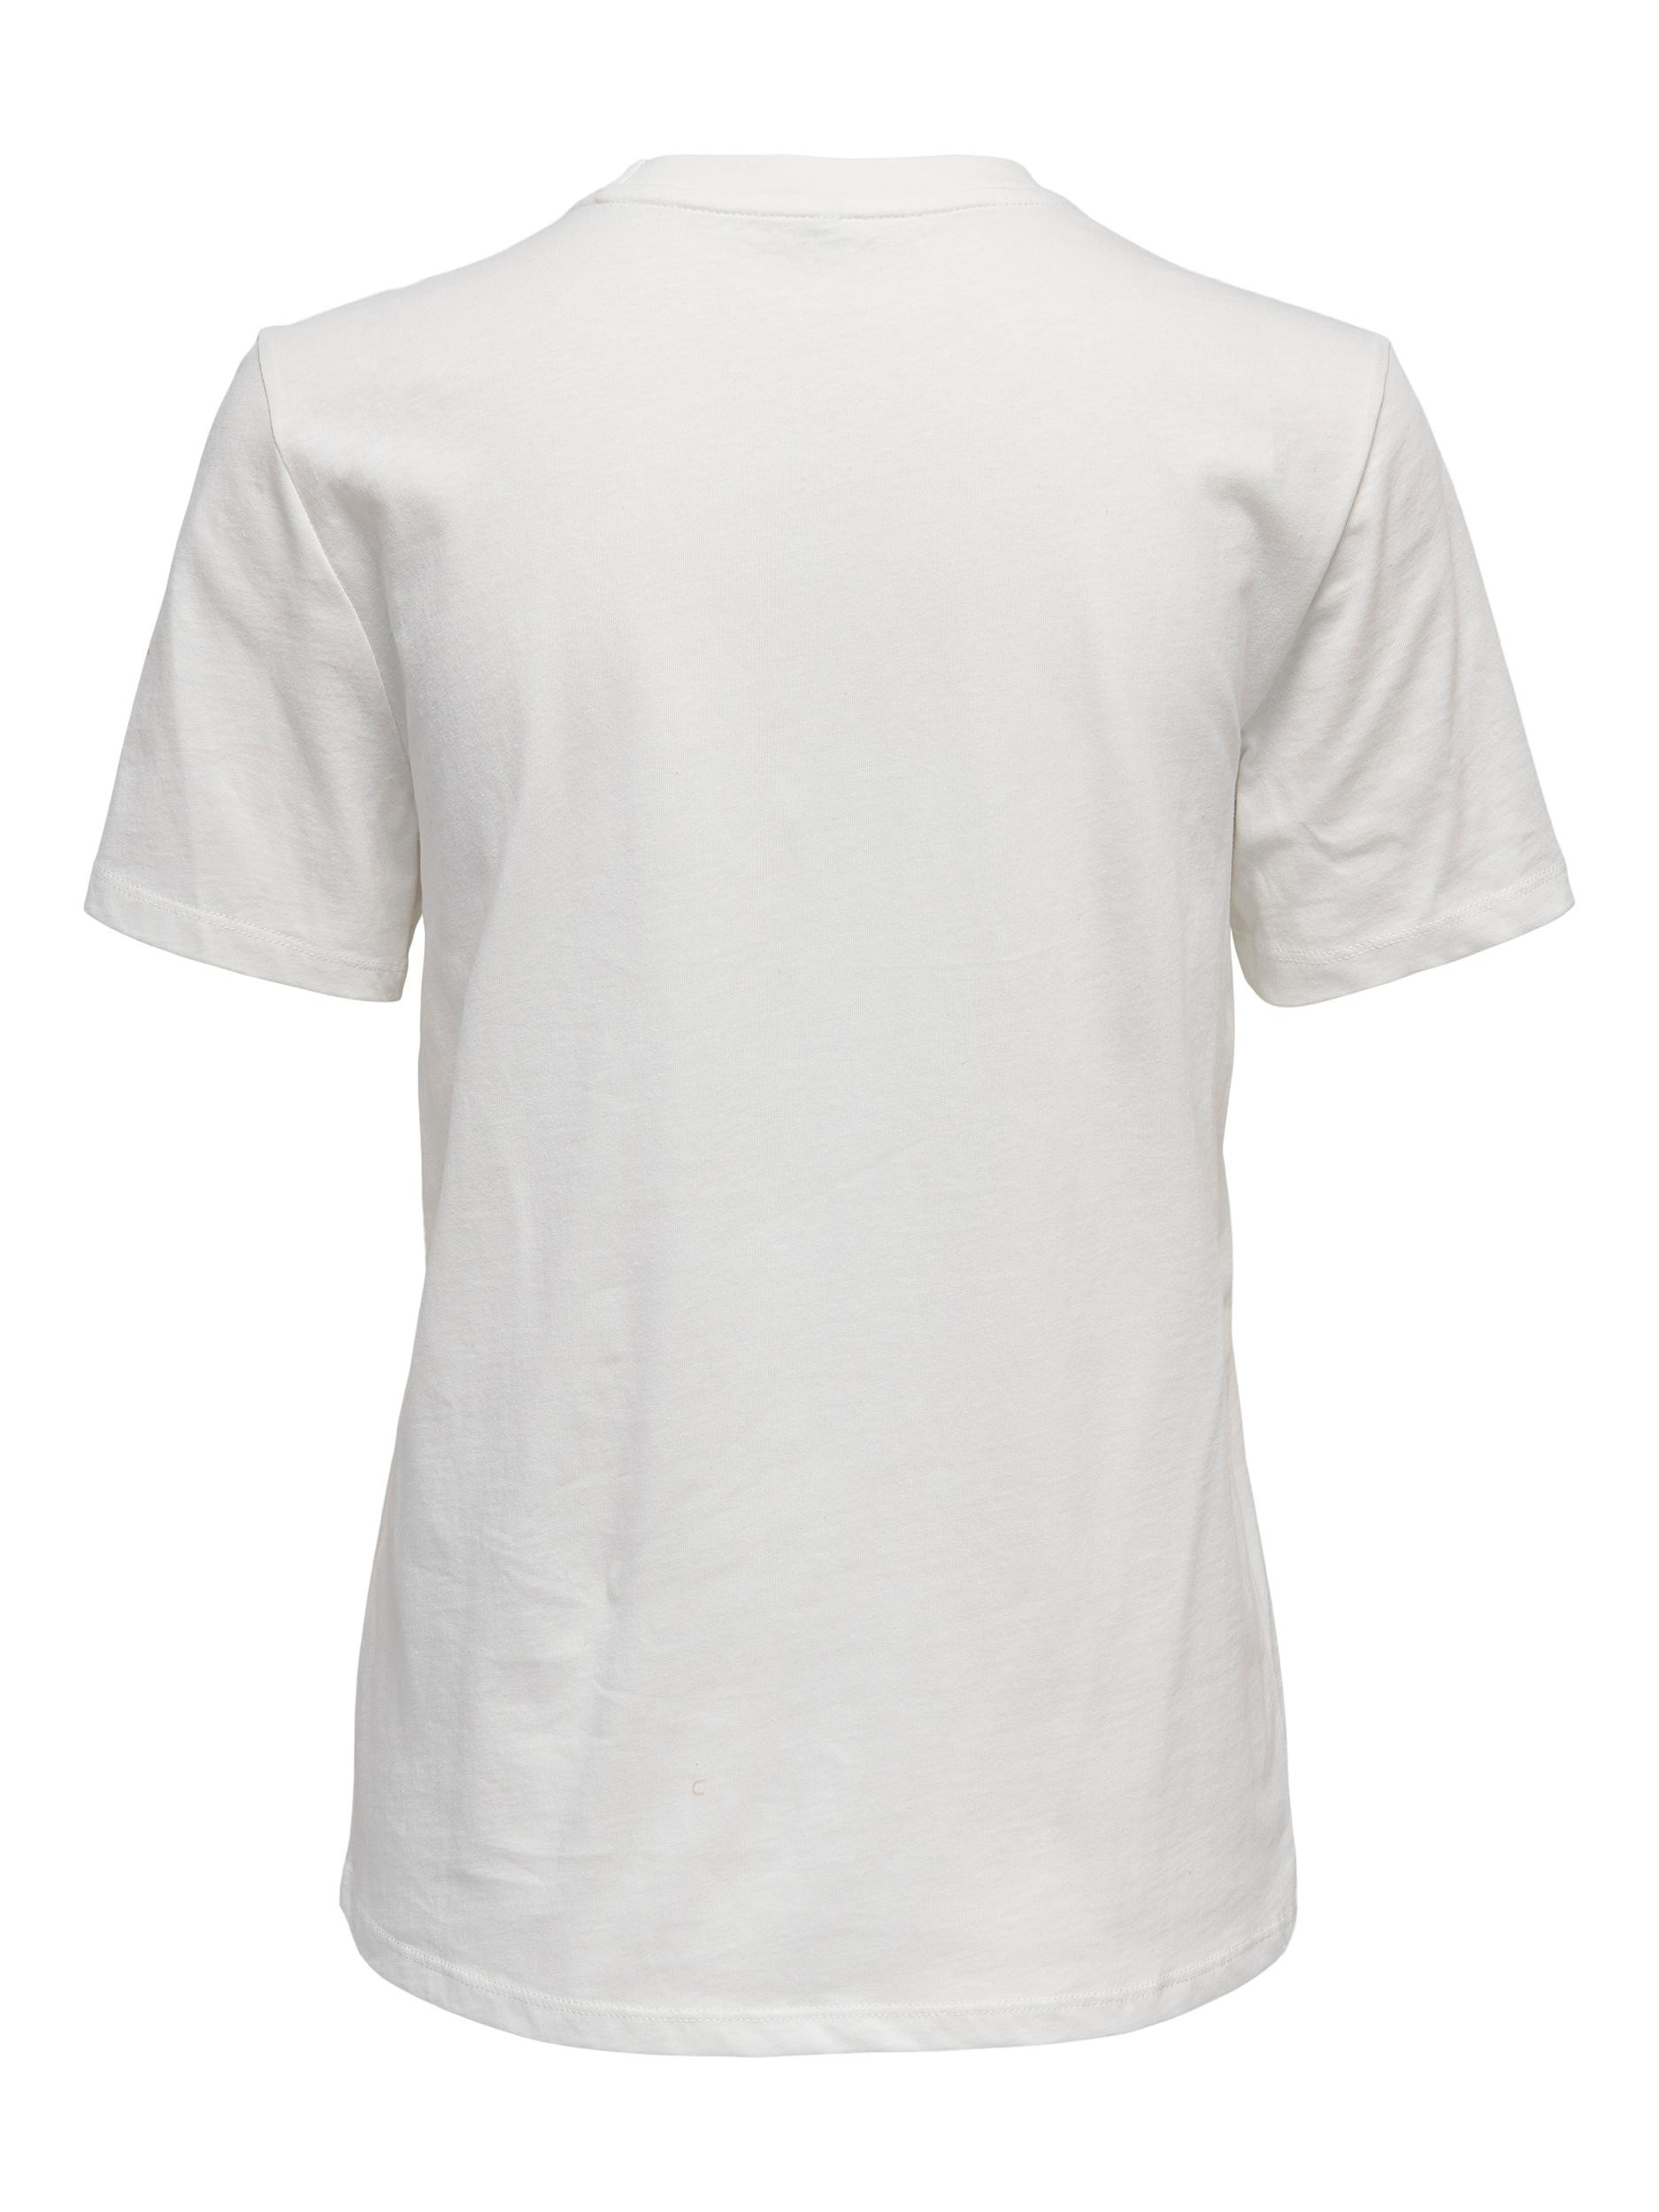 T-shirt con fiocco, Bianco, large image number 1